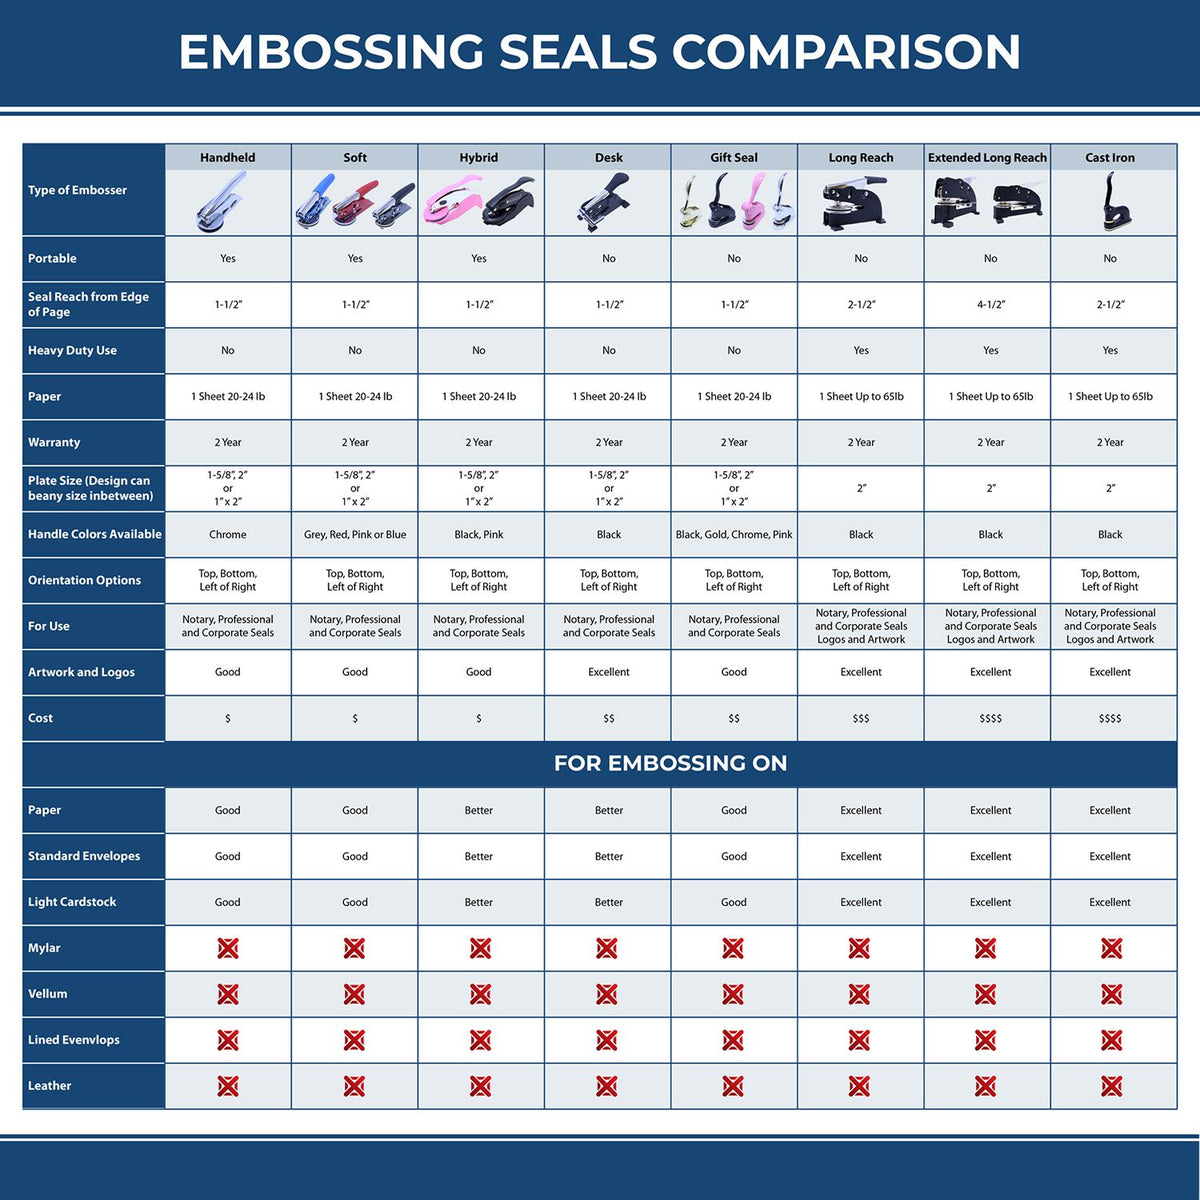 A comparison chart for the different types of mount models available for the Hybrid Kentucky Geologist Seal